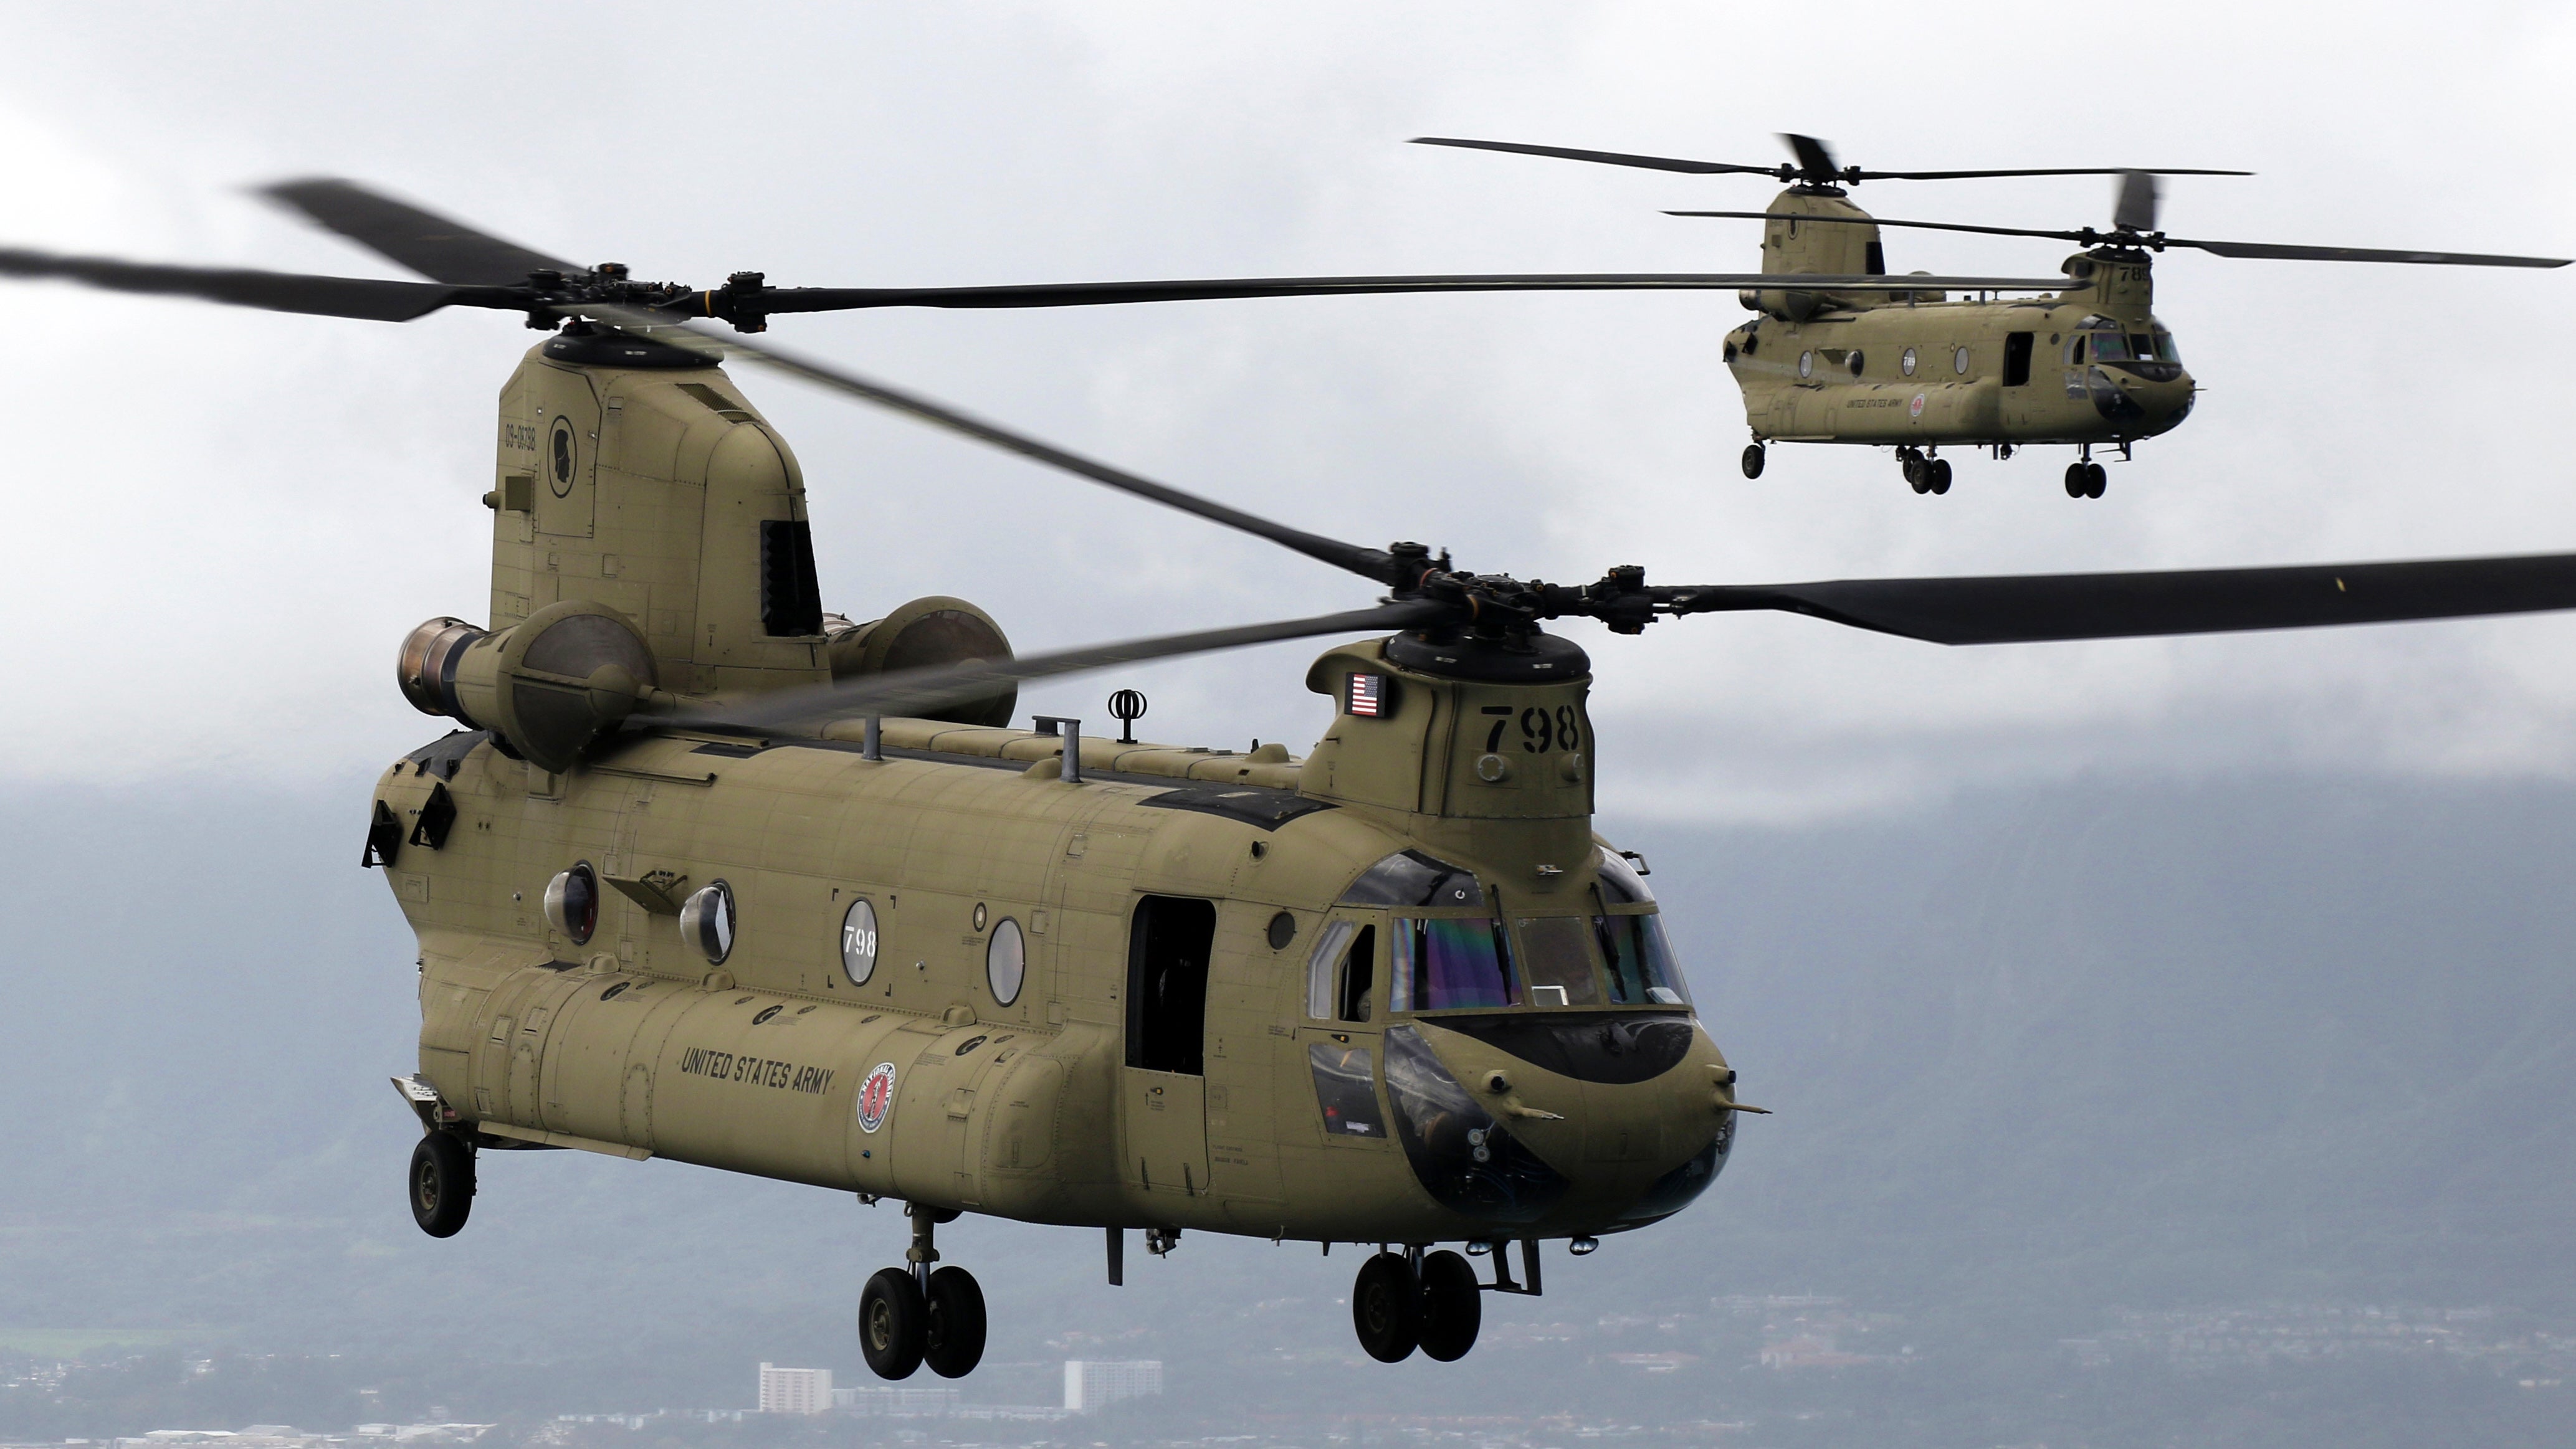 Two chinook helicopters